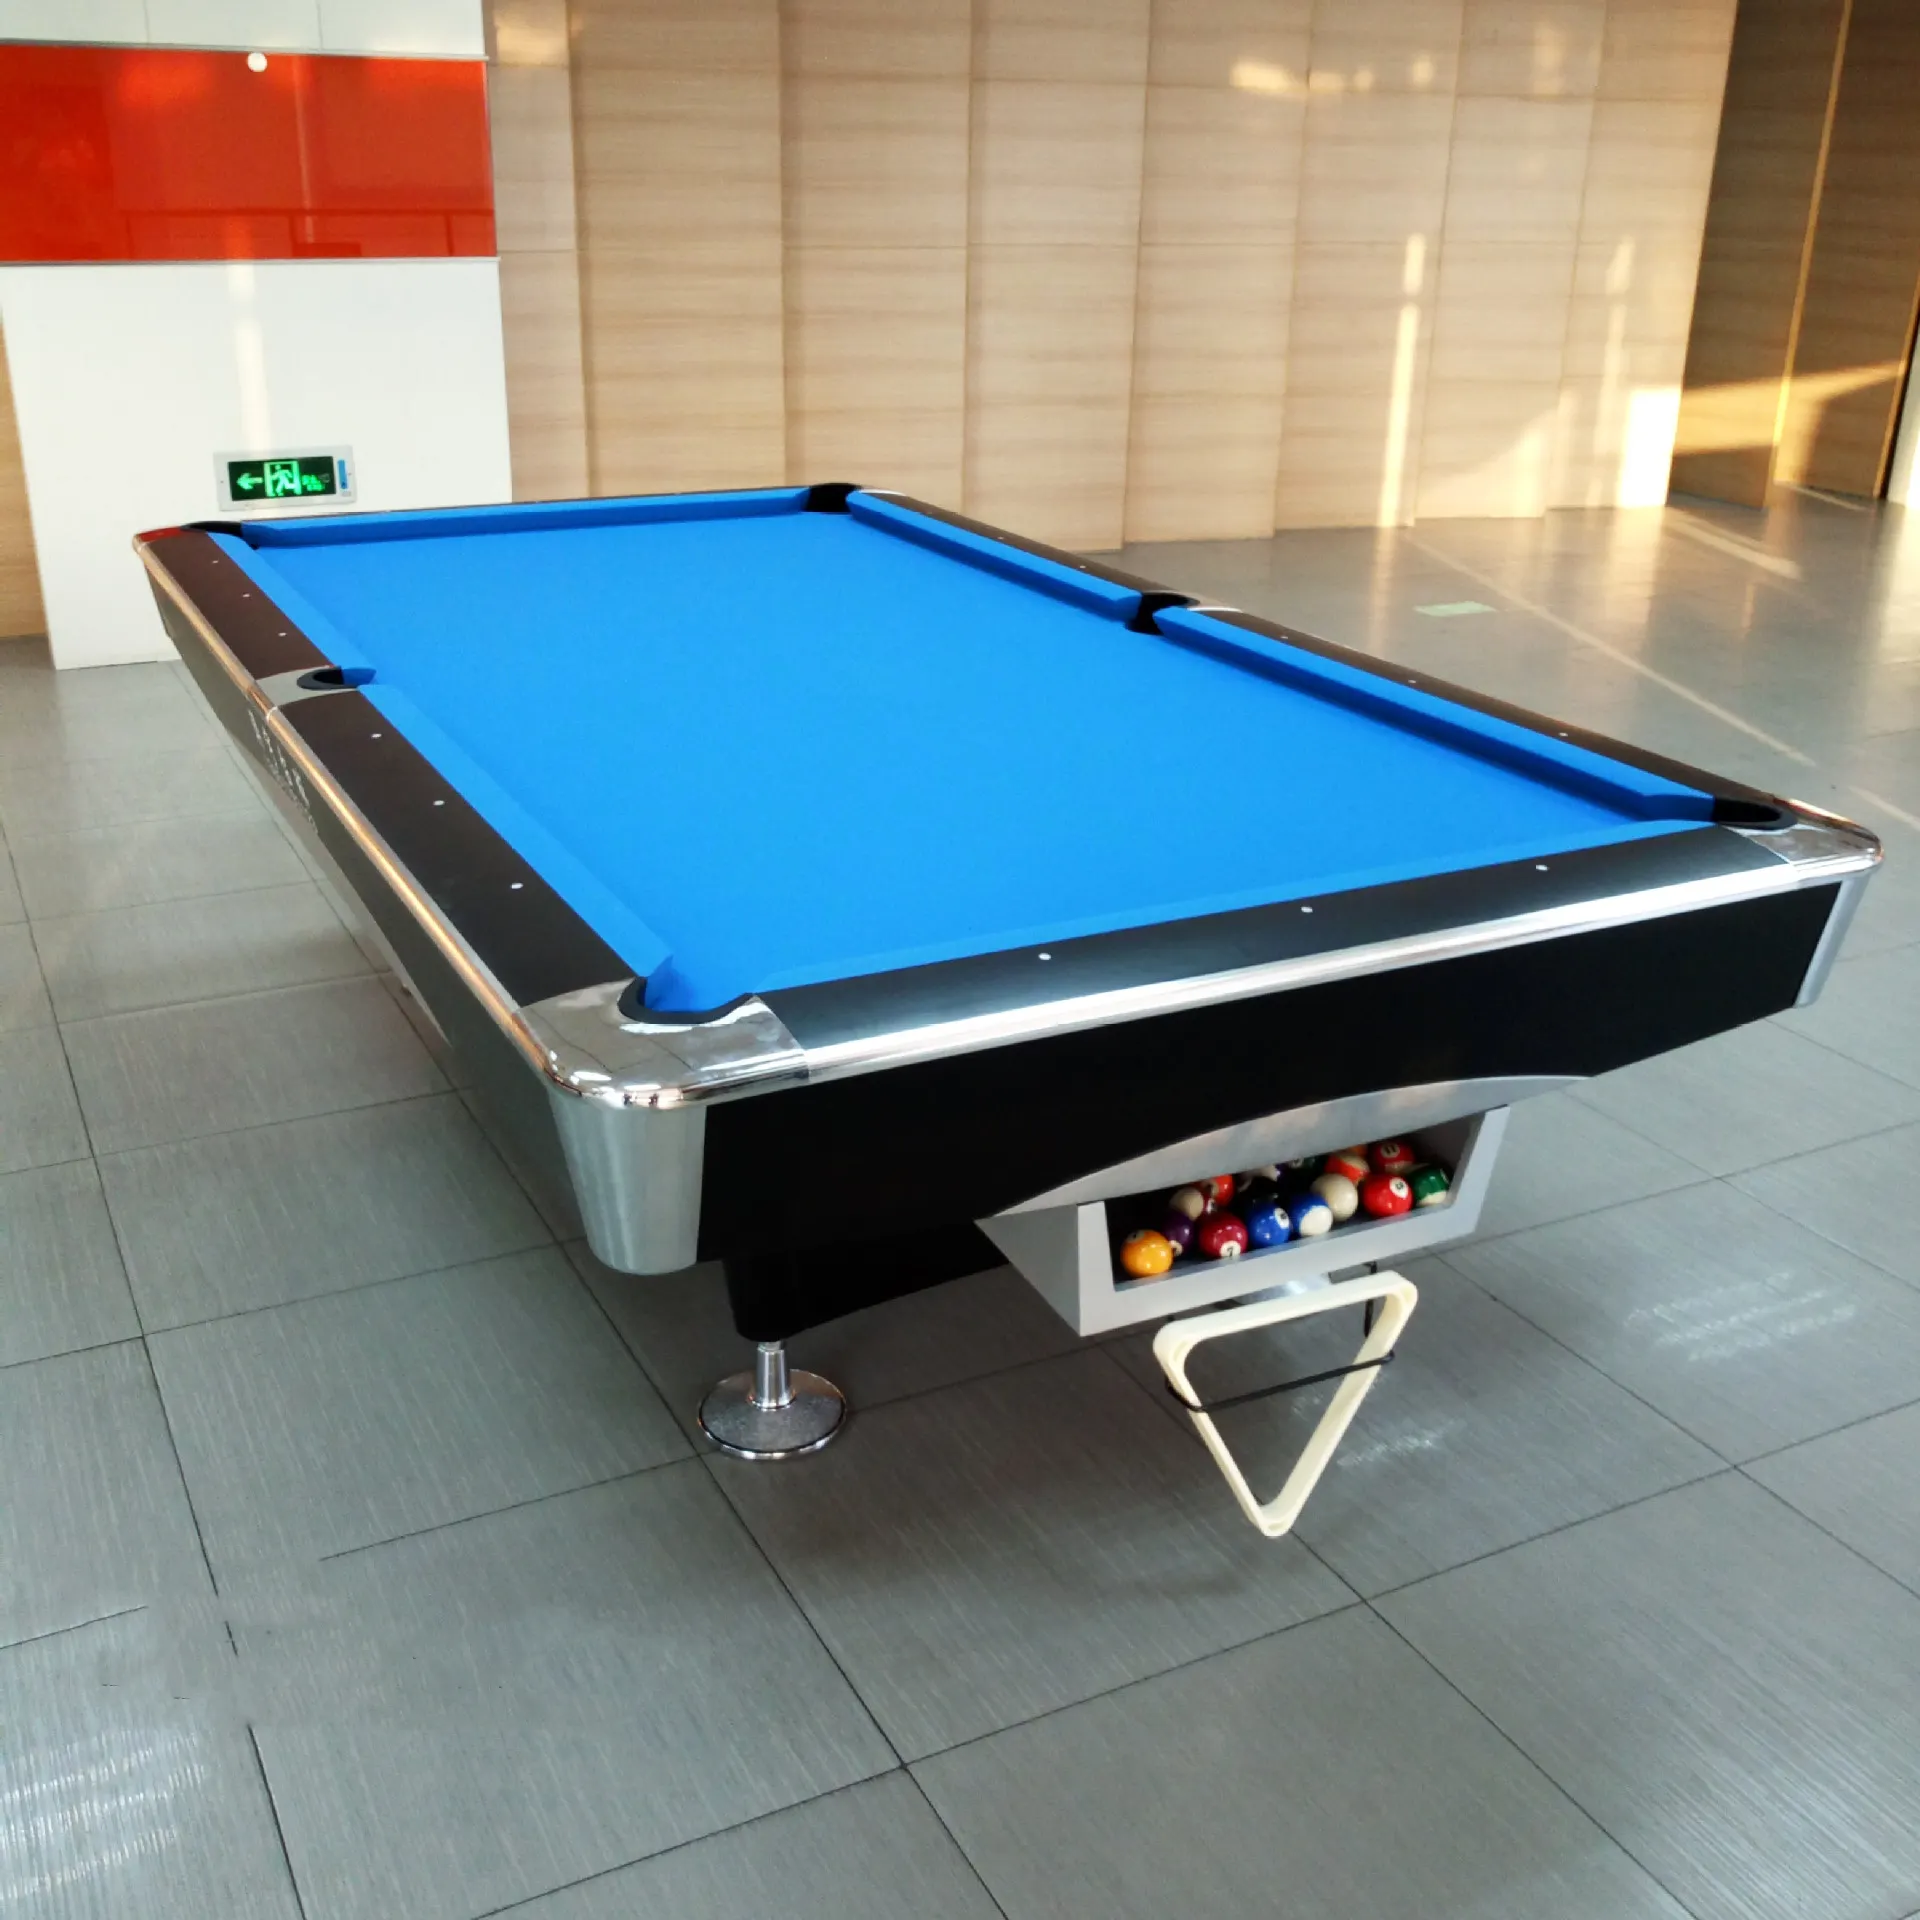 Popular China Cheap Hot sales 4 generation Original 9 Ball Solid Wood Stone Slate 8ft 9 feet billiards pool table for sale